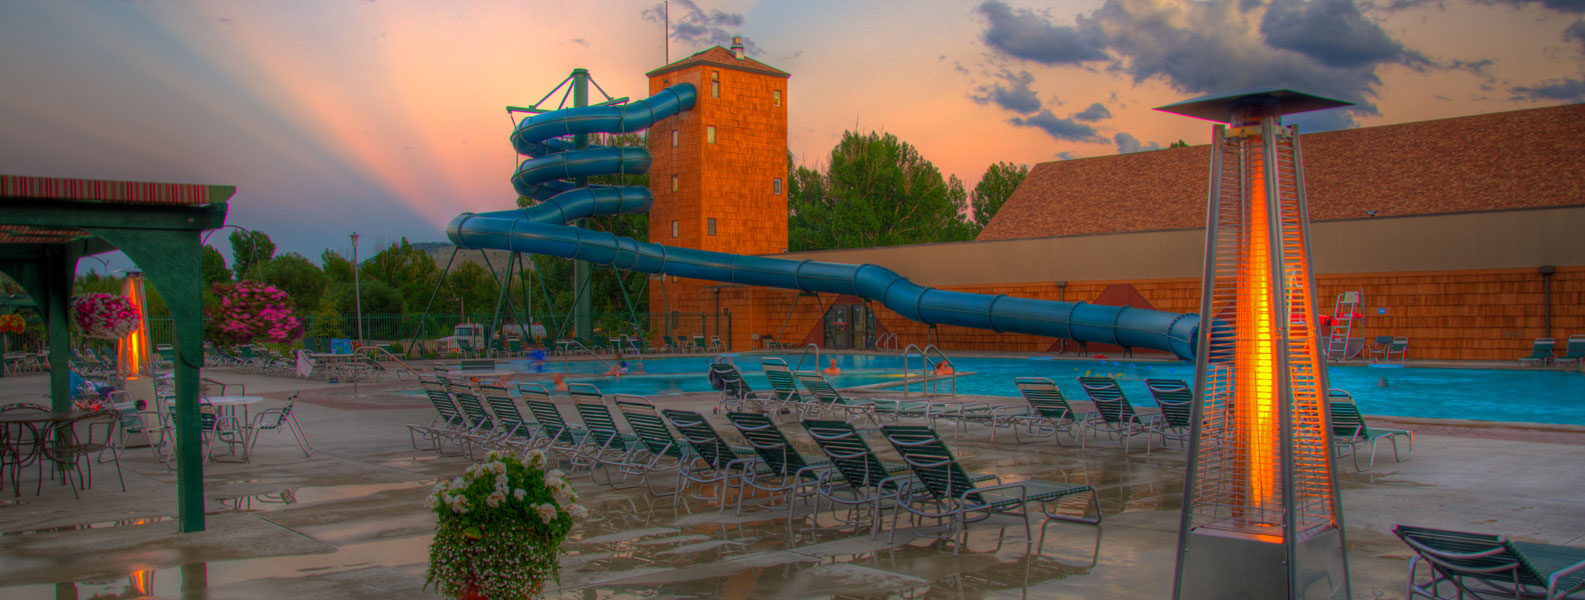 hotels in helena mt with waterslide